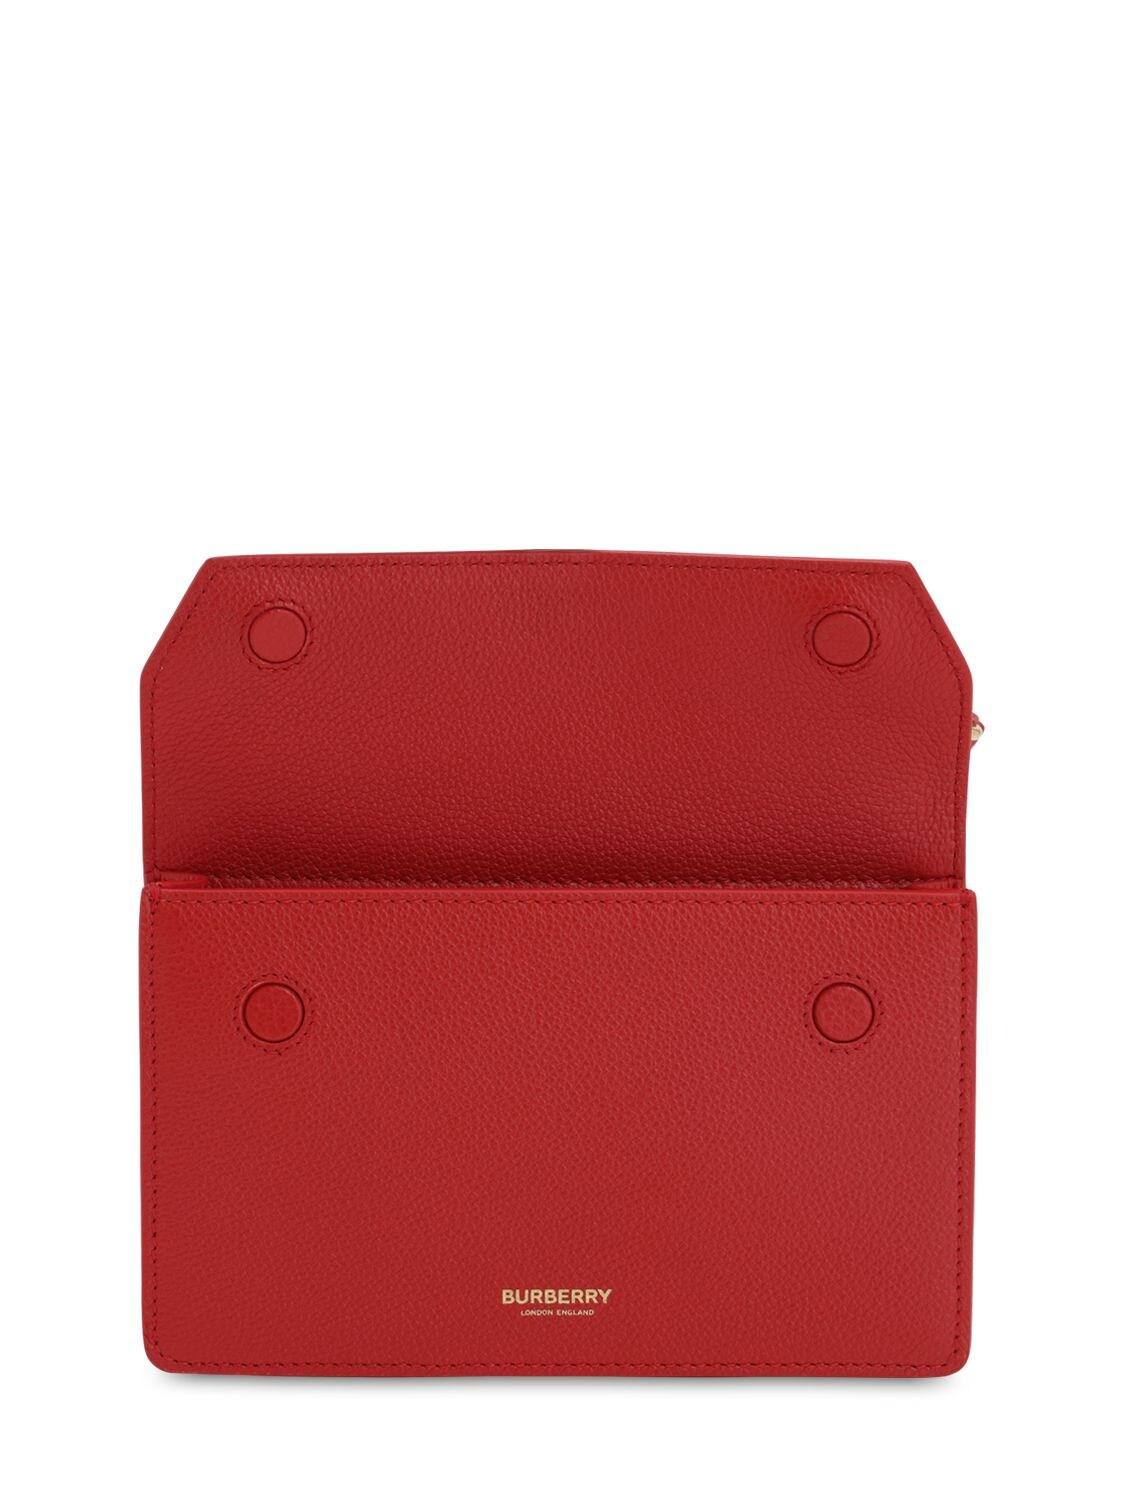 Burberry Baby Title Pocket Leather Shoulder Bag in Bright Red (Red 